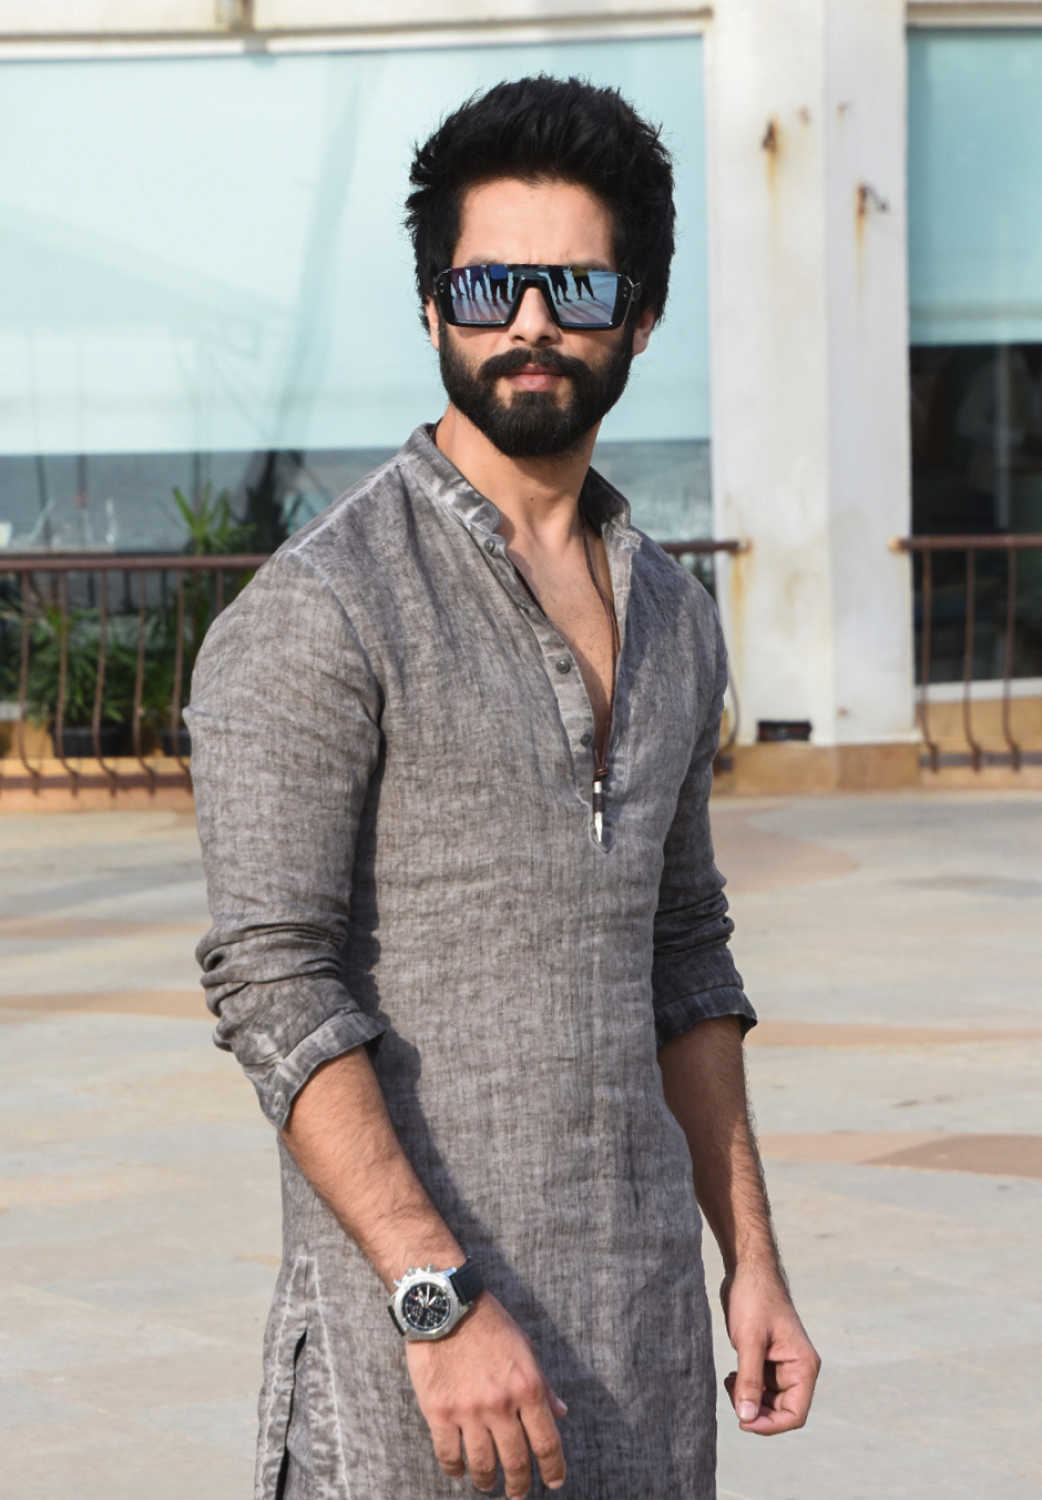 Remaking an iconic film is stressful: Shahid Kapoor on Arjun Reddy